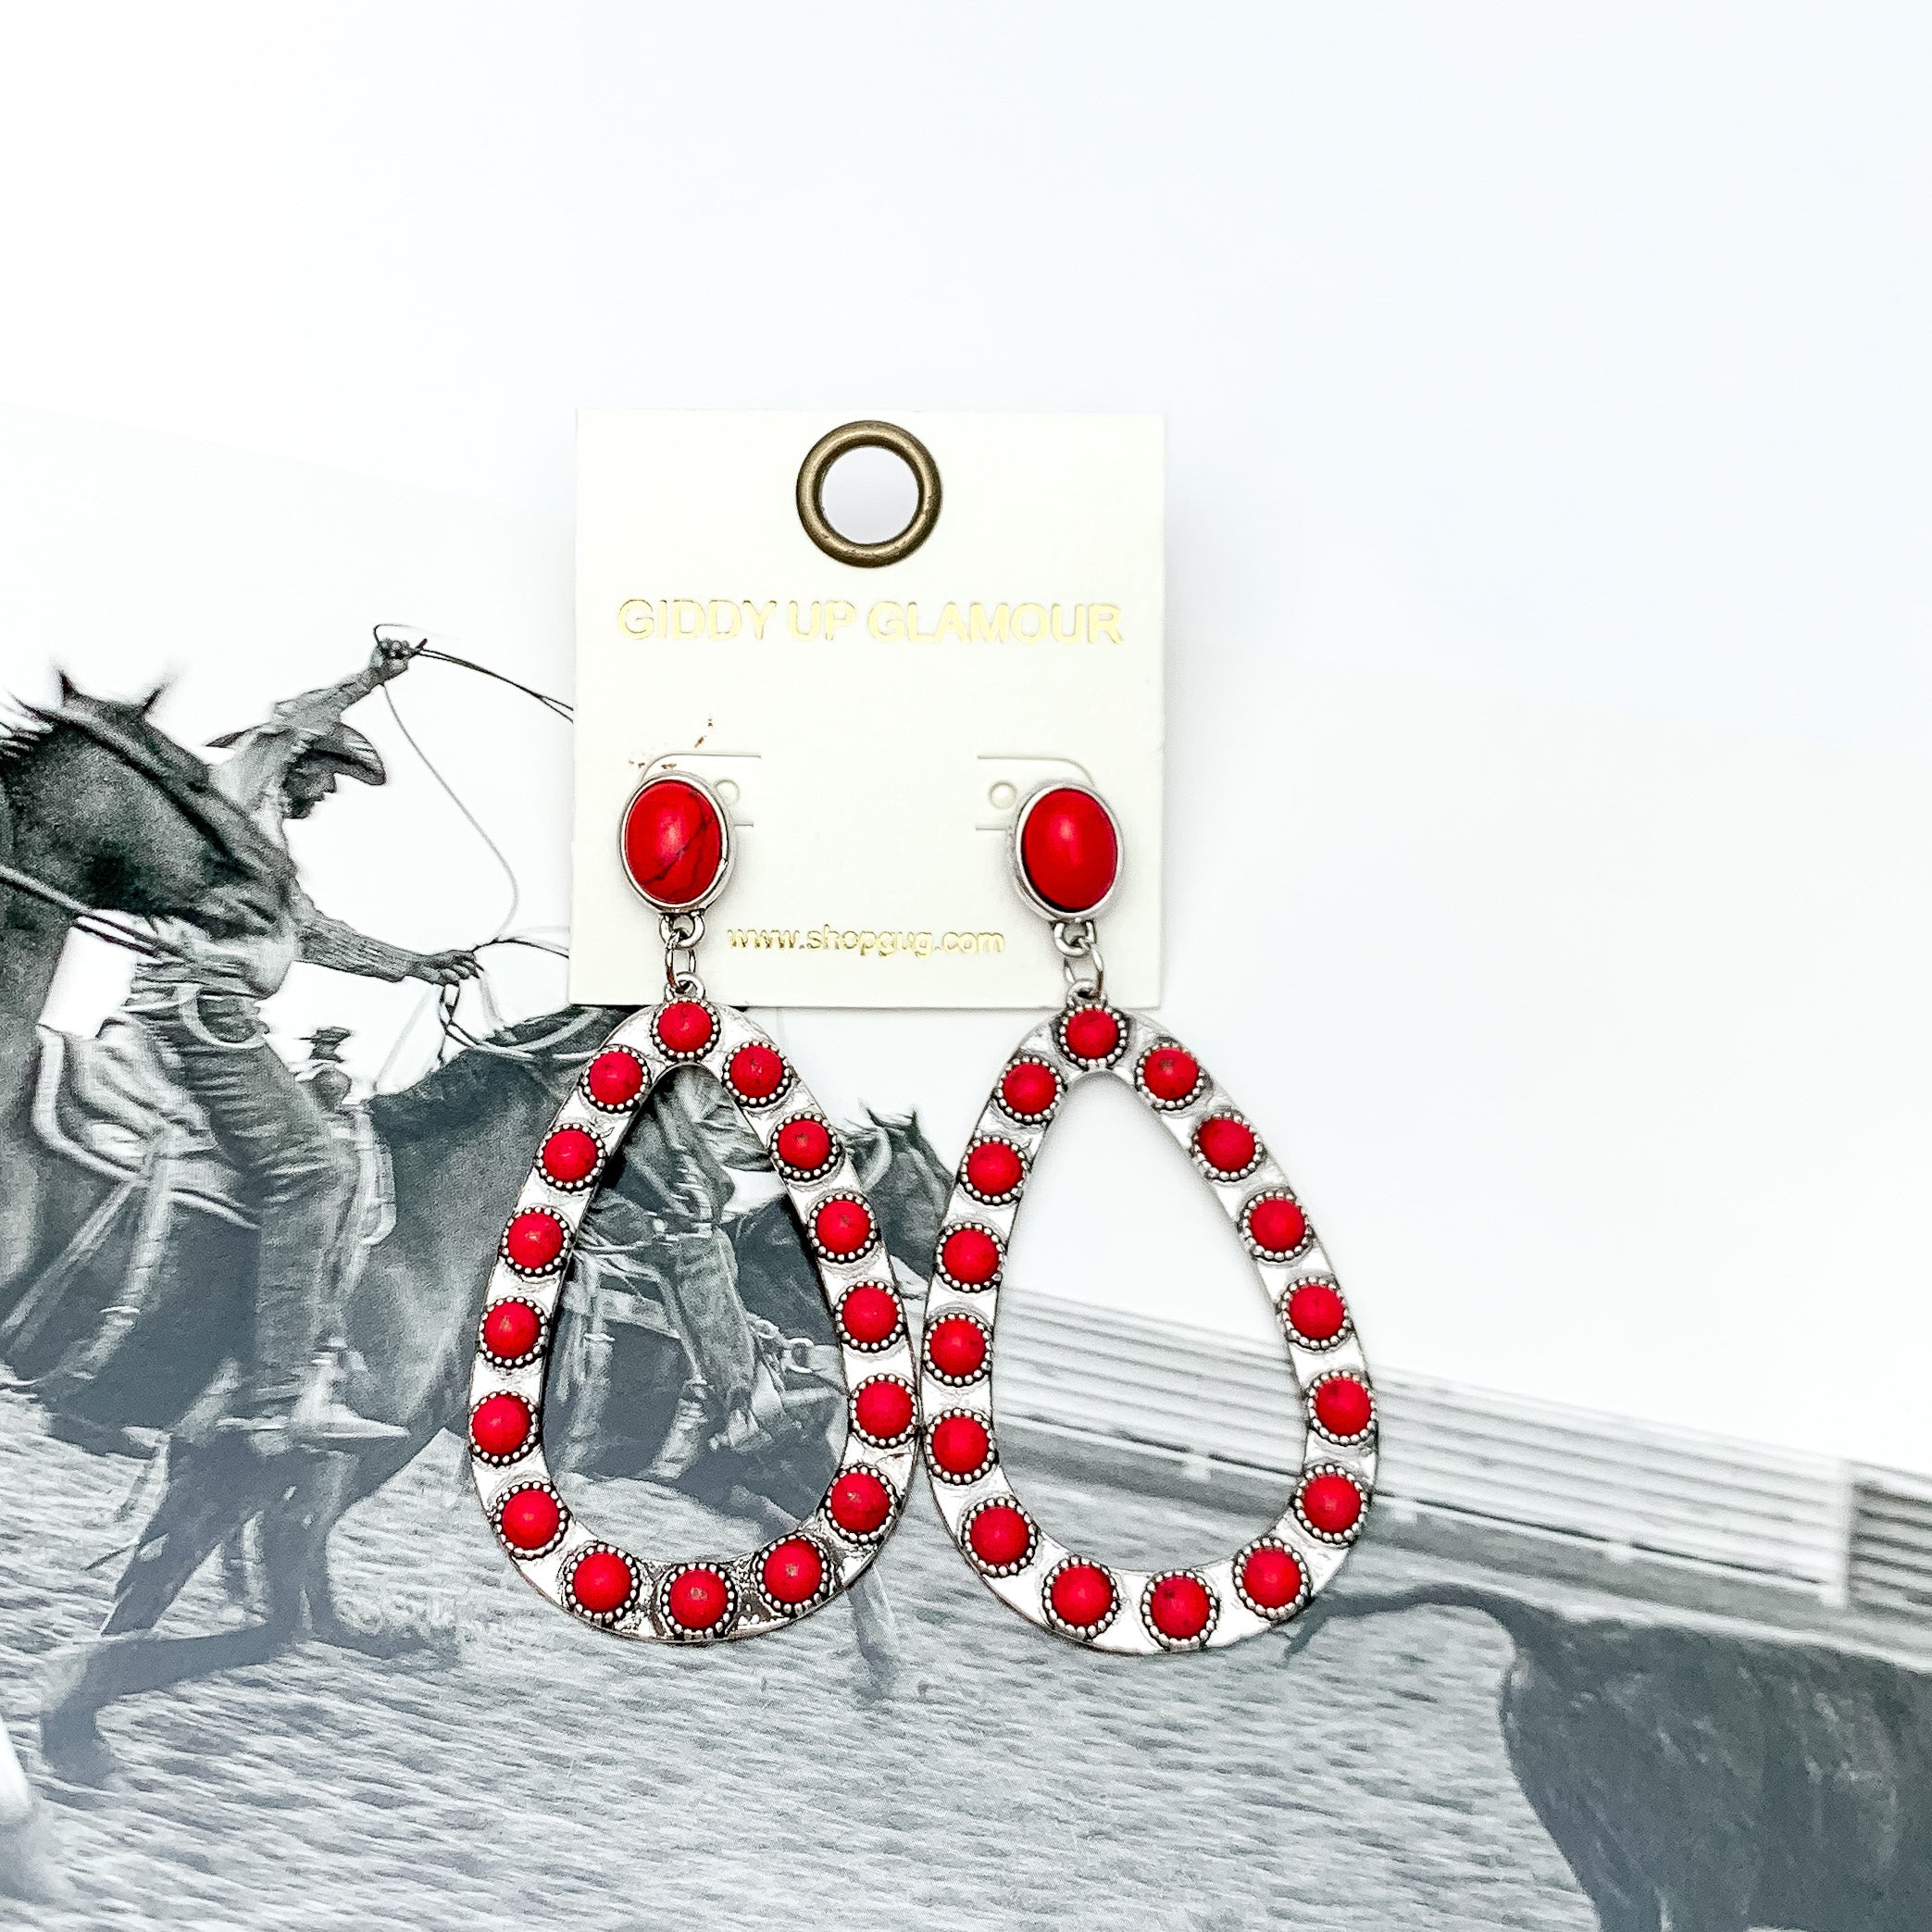 Western Open Teardrop Earrings With Stones in Red. Pictured on a western background picture.